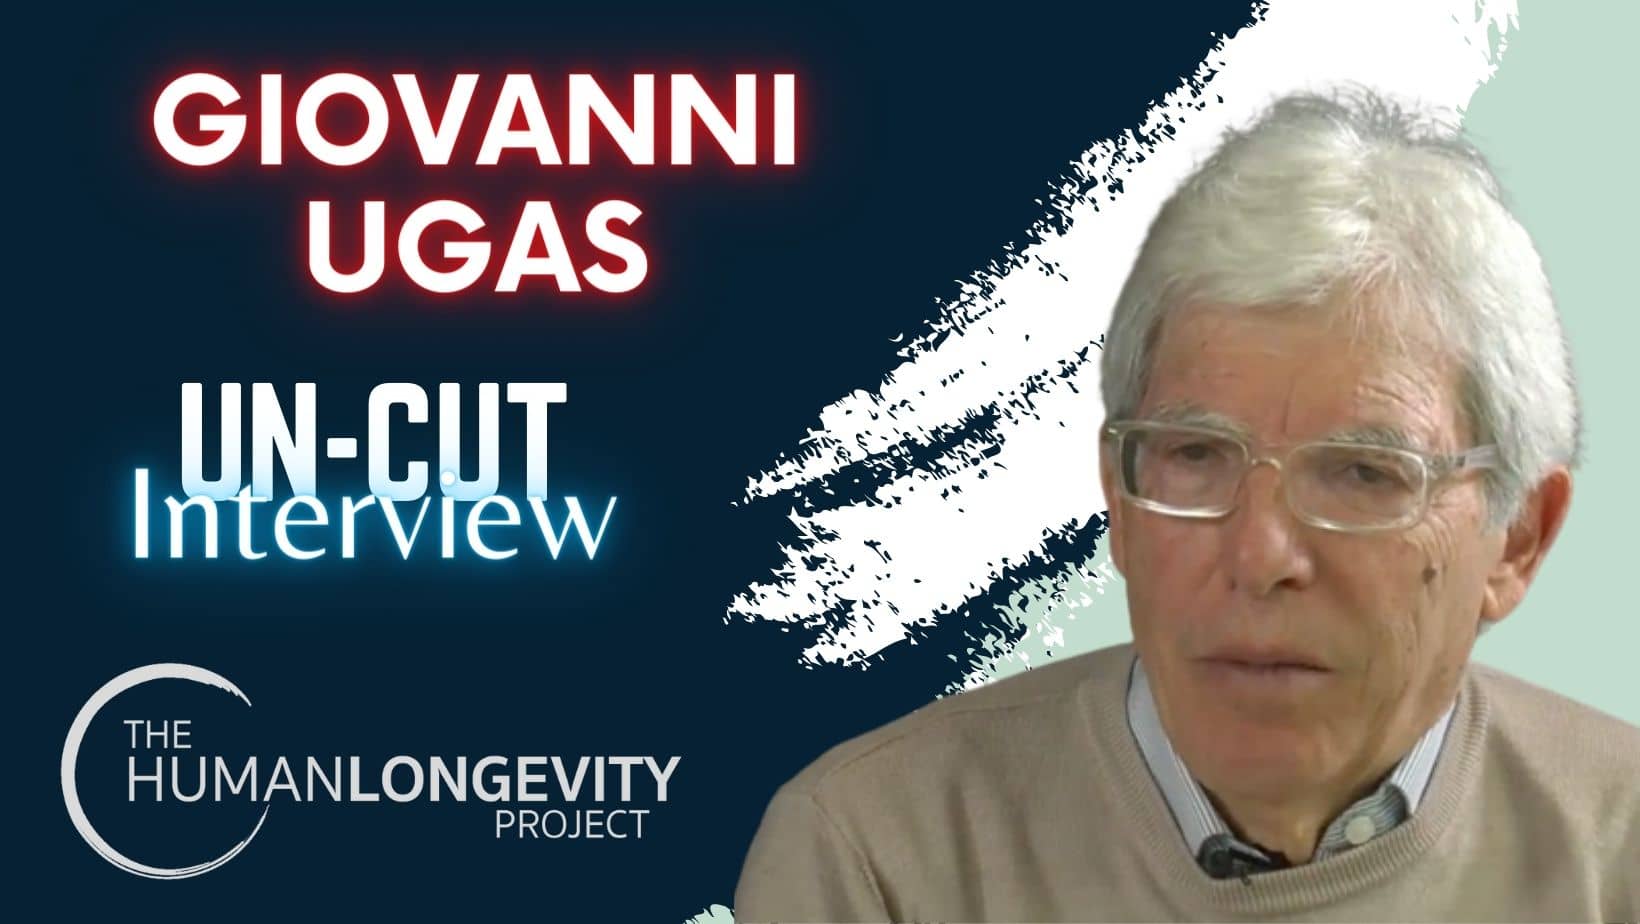 Human Longevity Project Uncut Interview With Giovanni Ugas